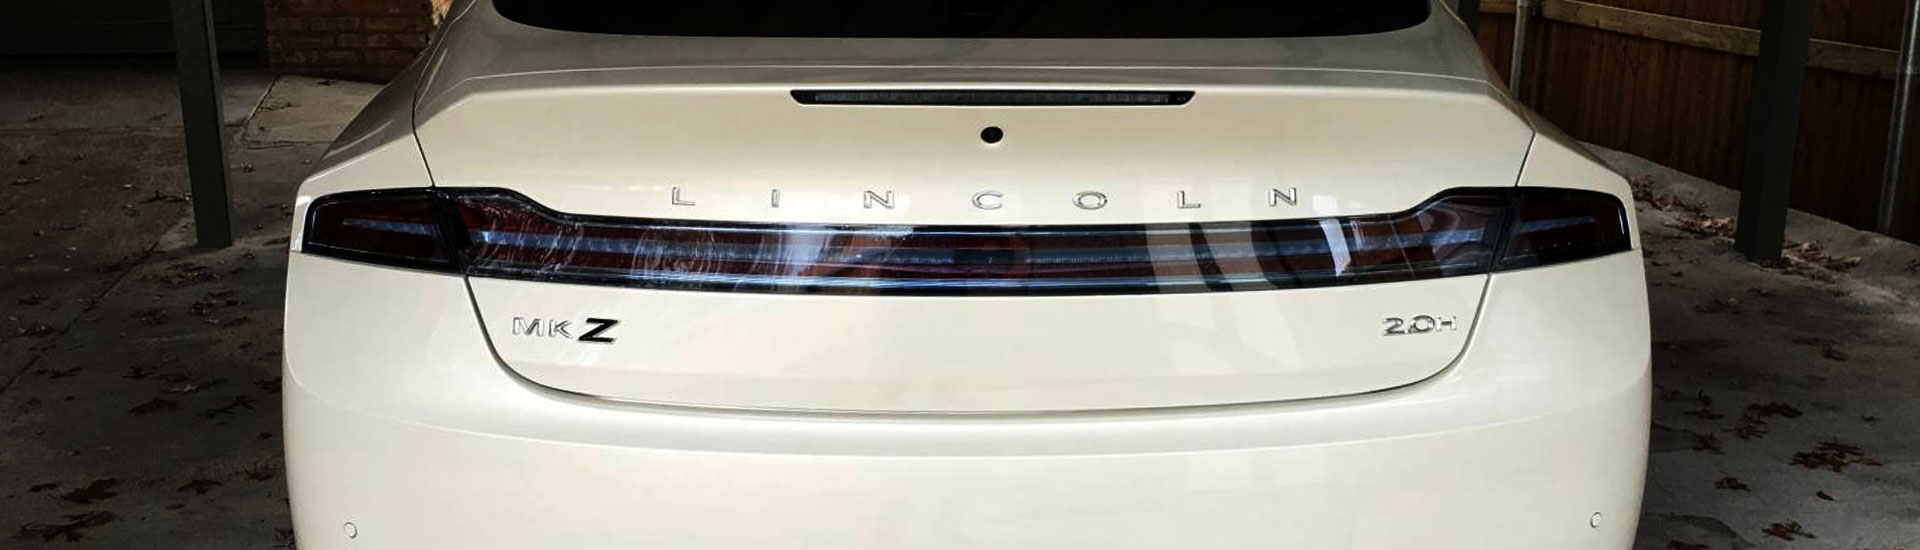 Lincoln Tail Light Tint Covers